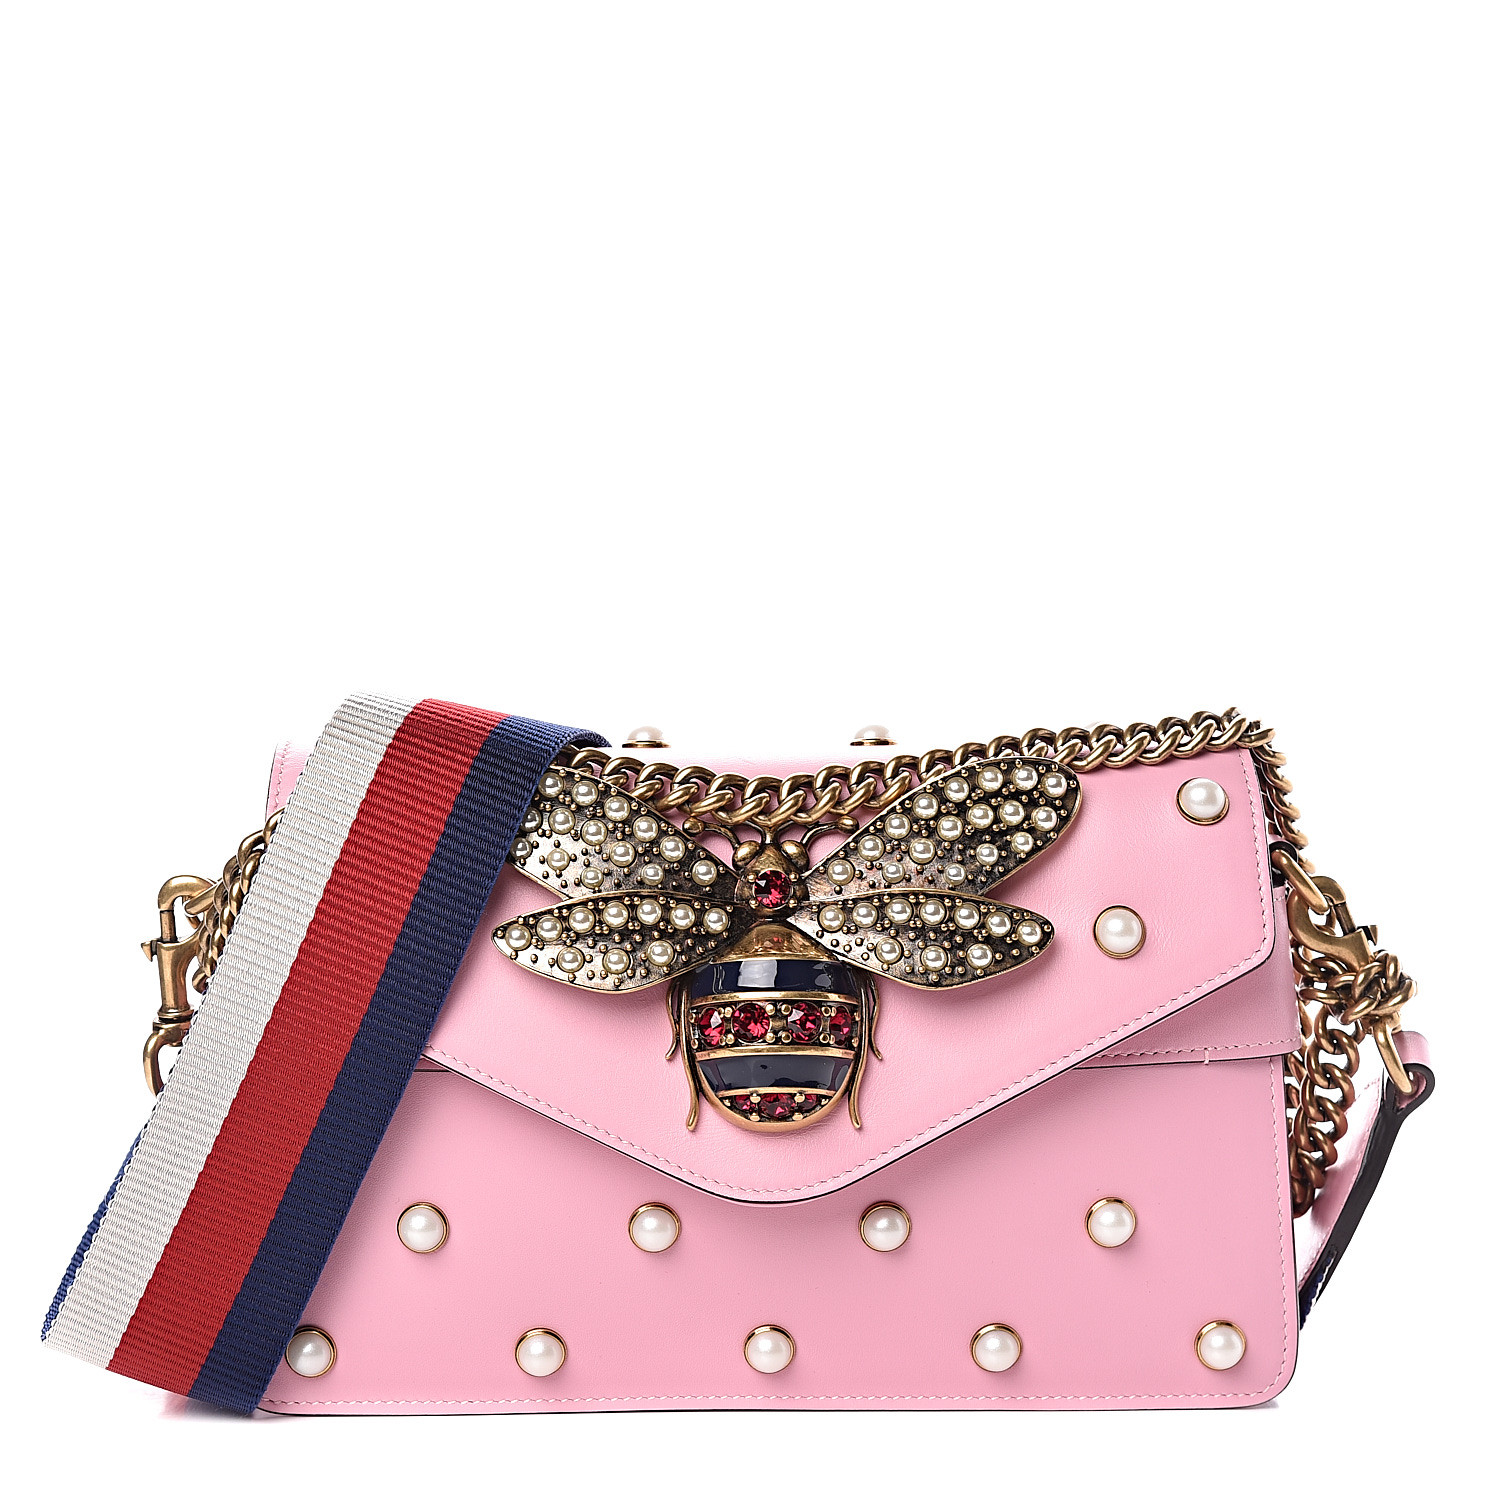 Gucci Bag With Bee And Pearls | NAR Media Kit